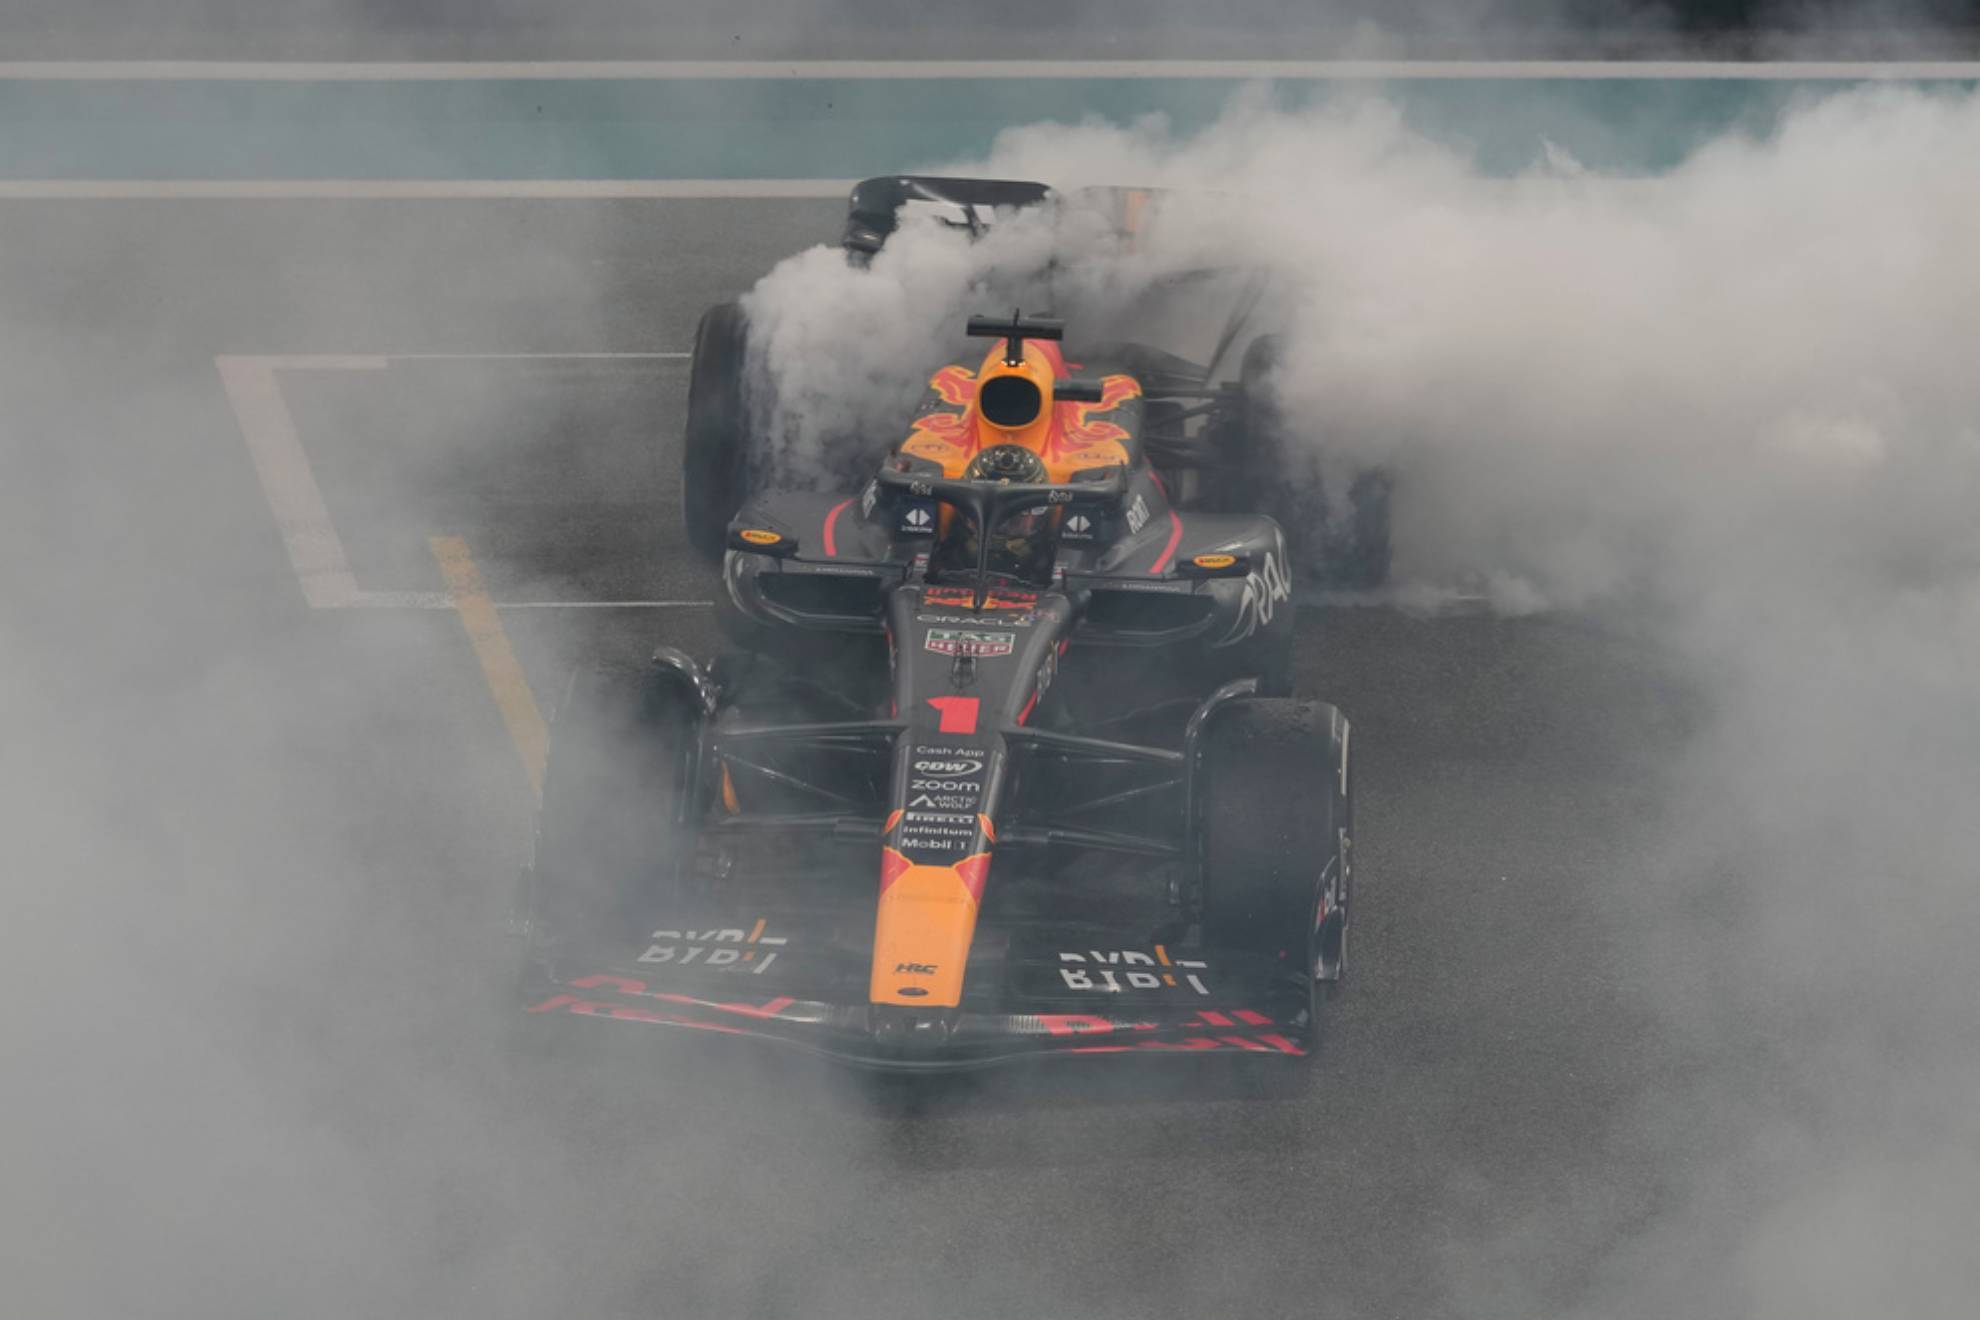 Max Verstappen spins in his car as he celebrates winning the Abu Dhabi Formula One GP